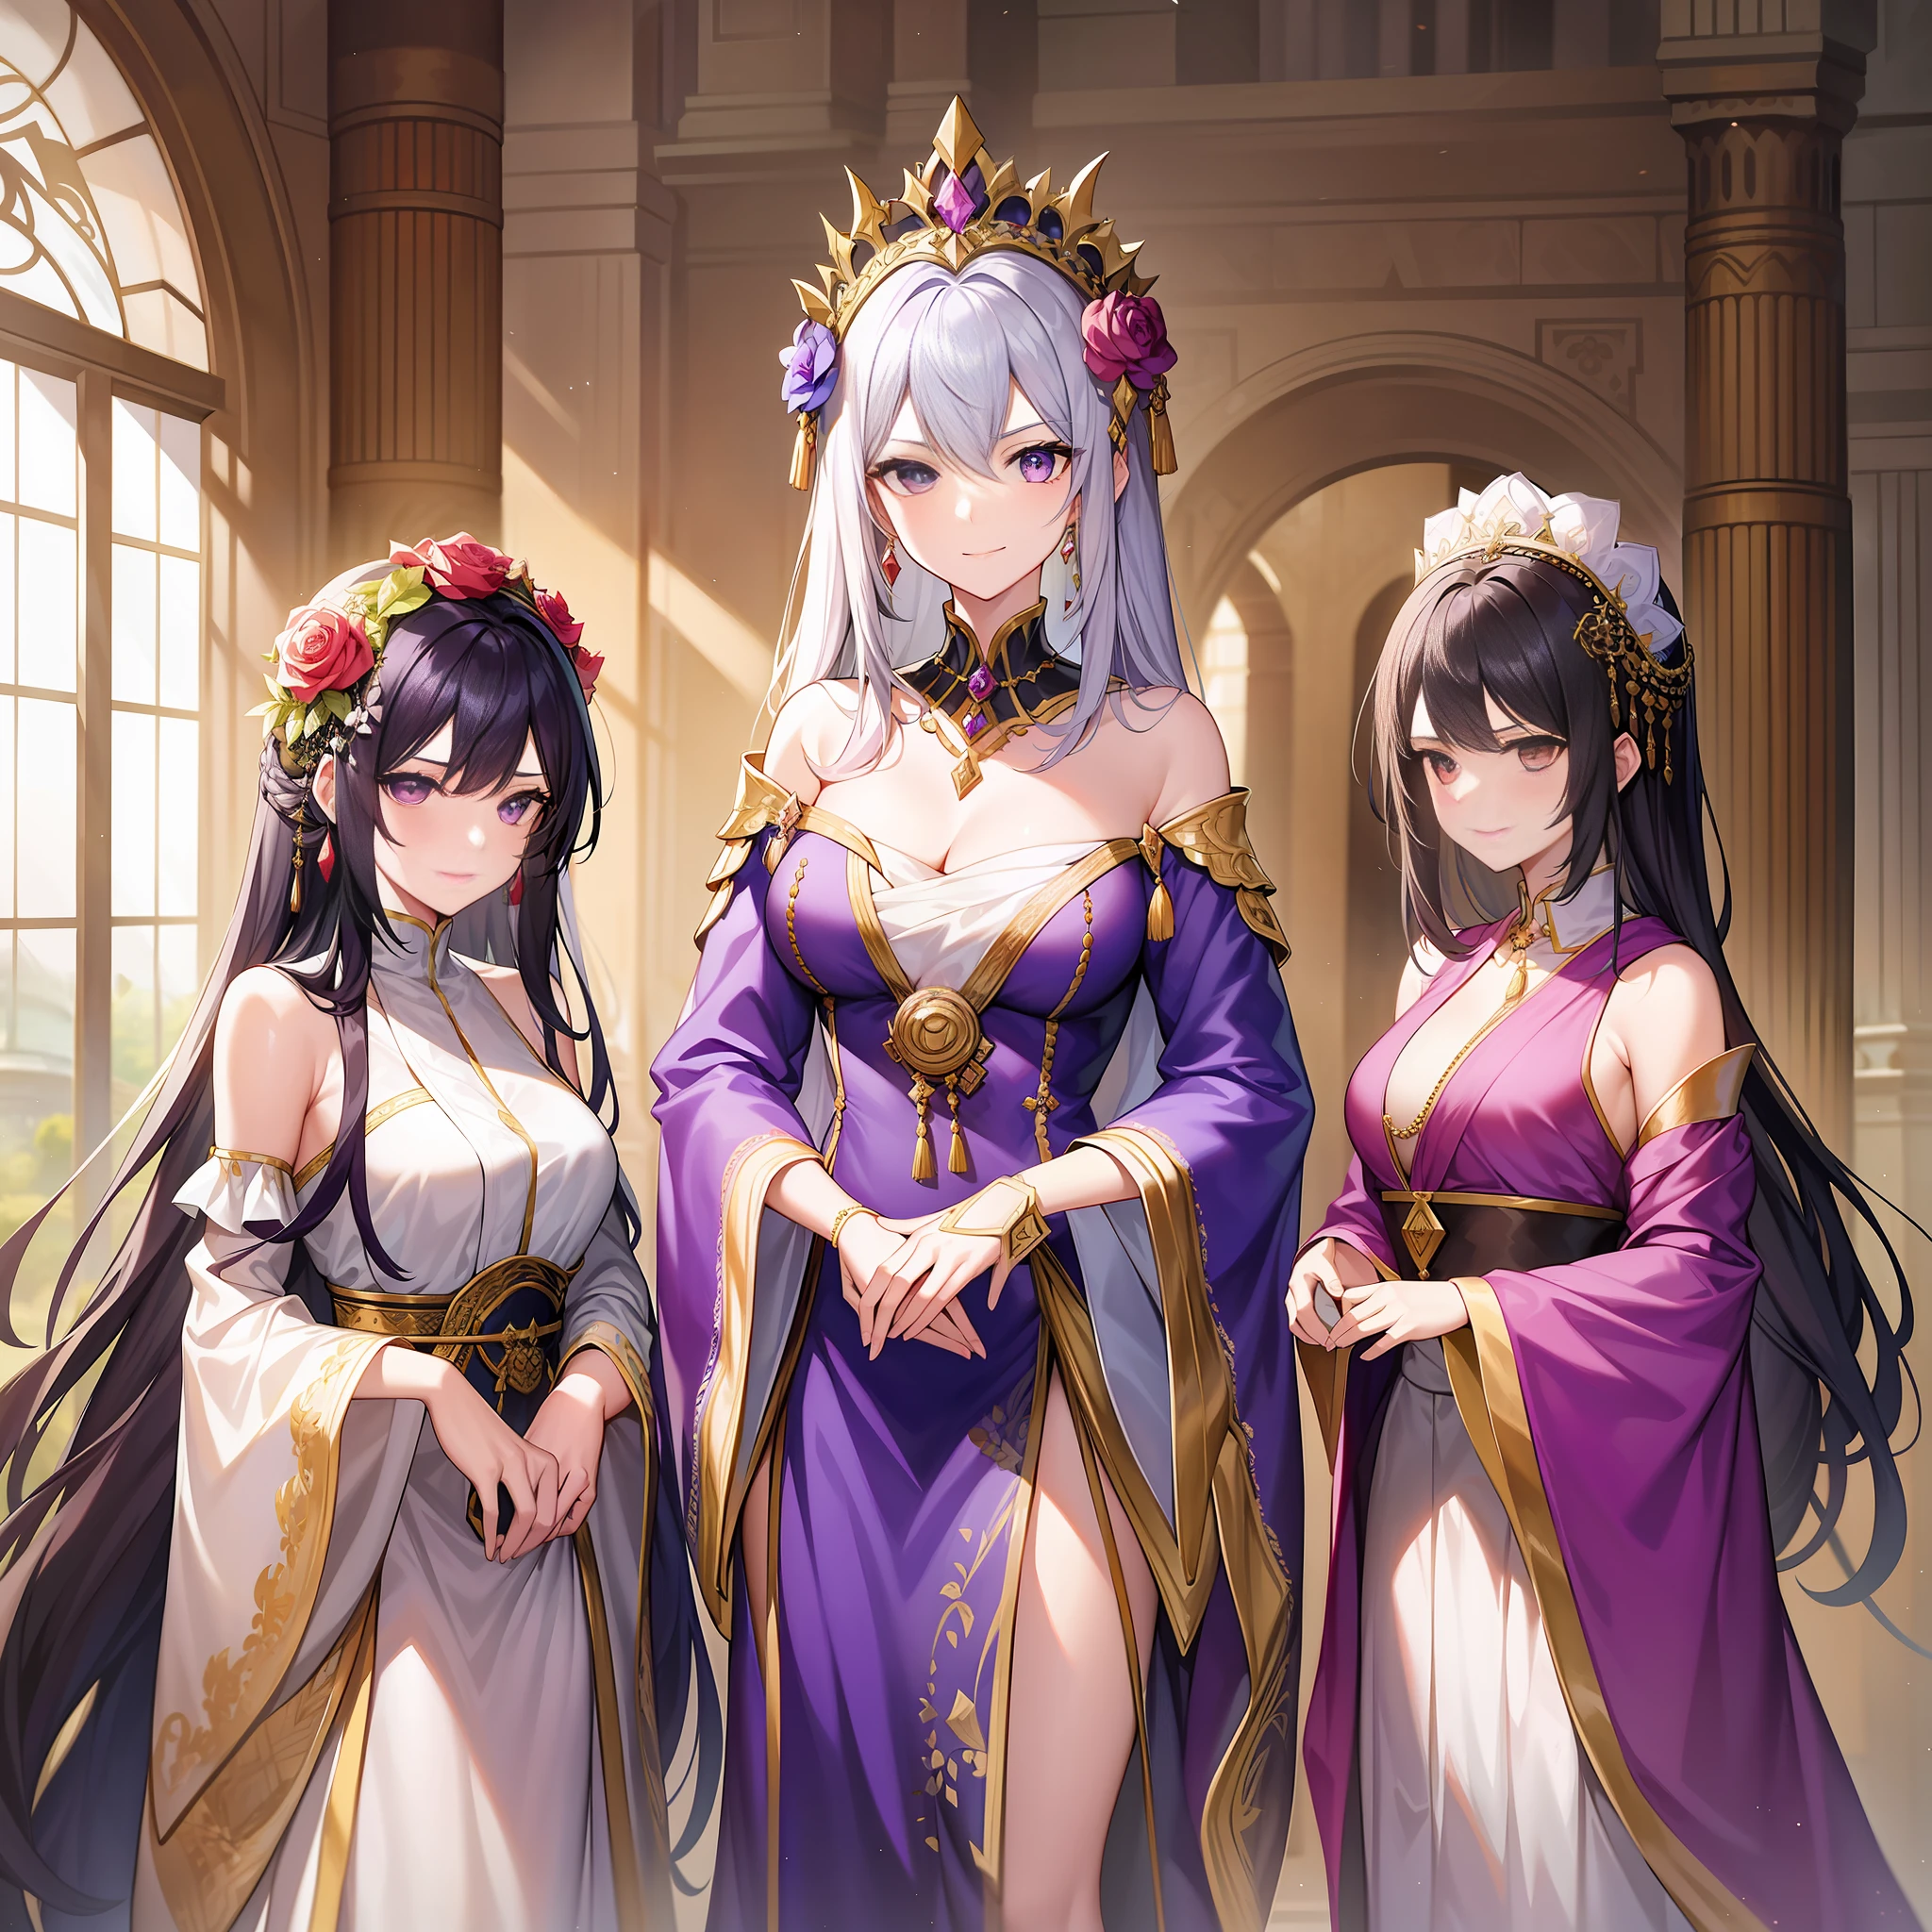 In a palace, three female emperors stood angrily side by side, among which the black-haired female emperor wore a silver shawl, her gaze firm; The white-haired emperor wore a delicate white long dress and a headdress of red rose flowers, her smile was gentle, and she held a book in her hand; The purple-haired female emperor wore a light purple dress with an emerald green flower on her head, her eyes were deep, and she held a violin in her hand.